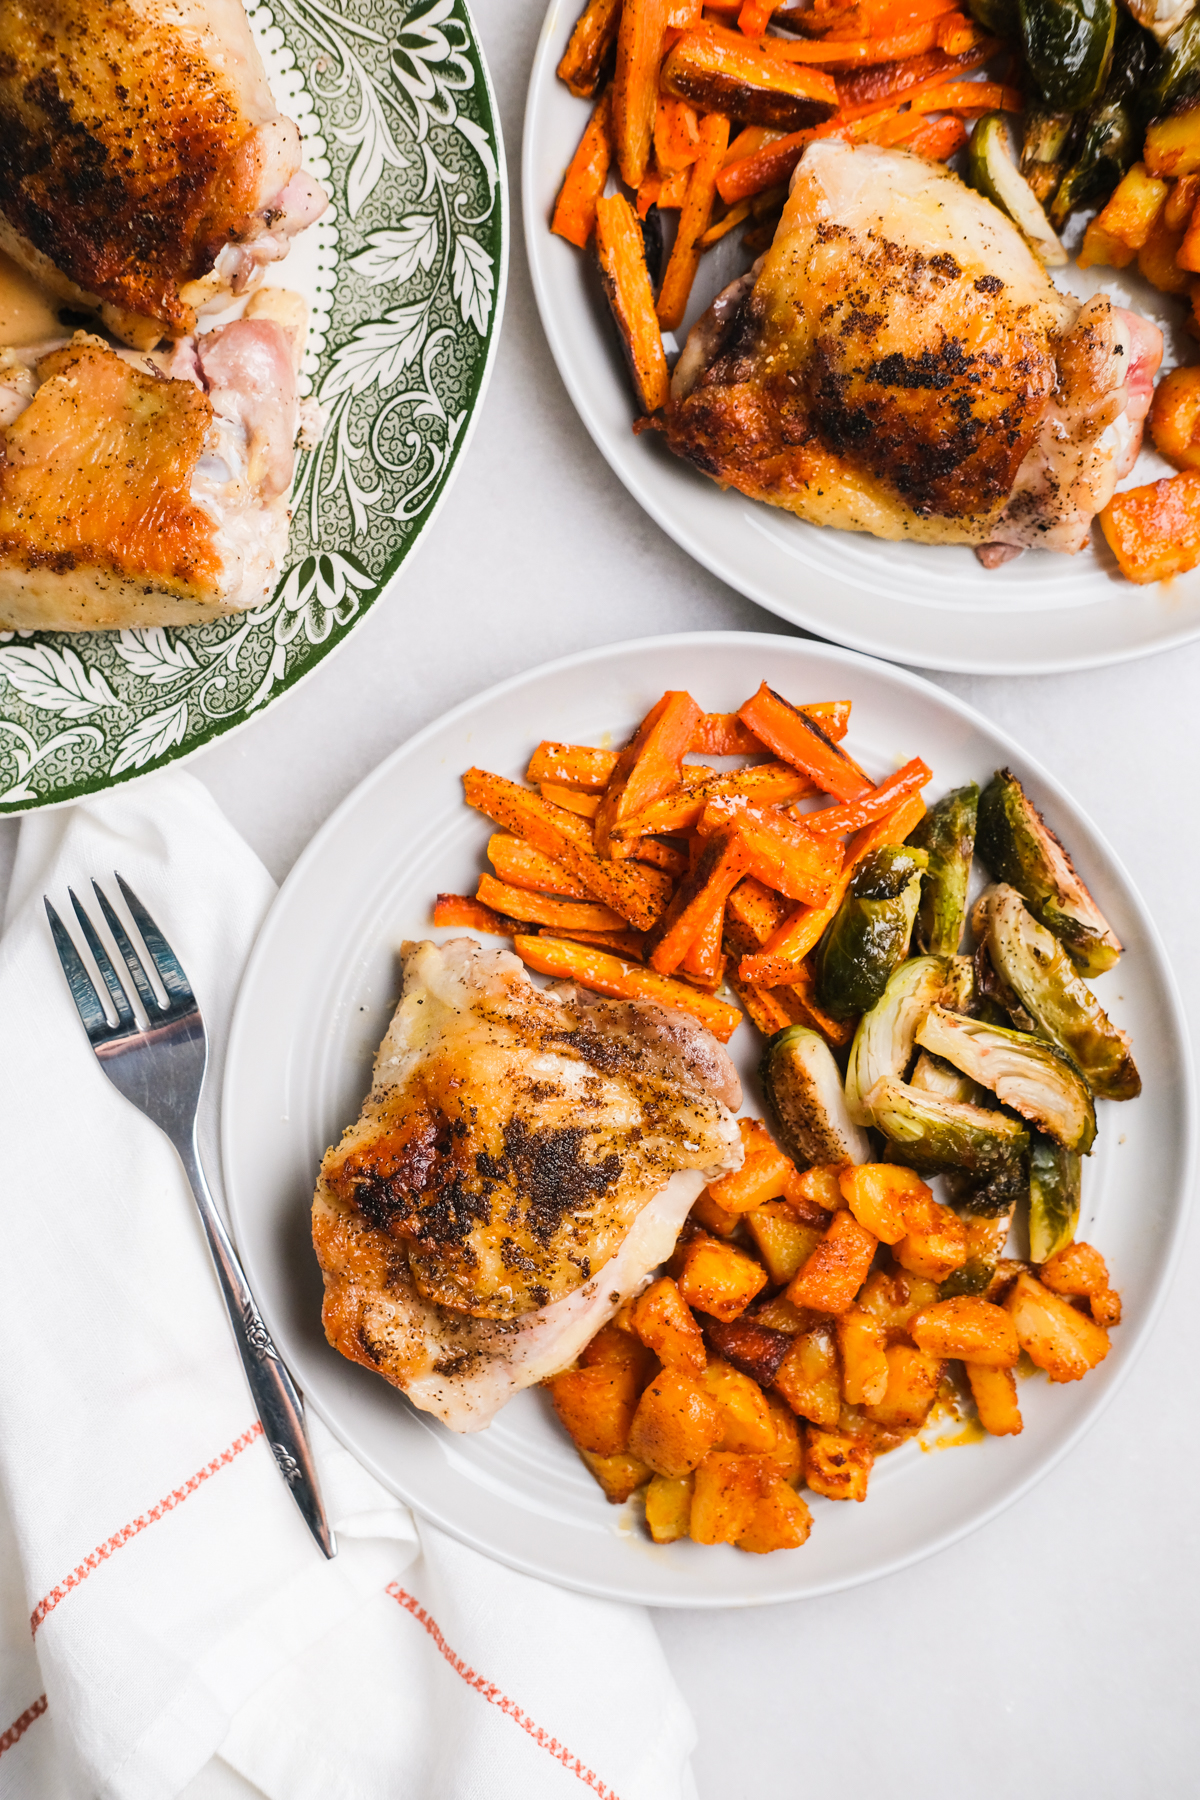 chicken thigh dinner with roasted vegetables and potatoes